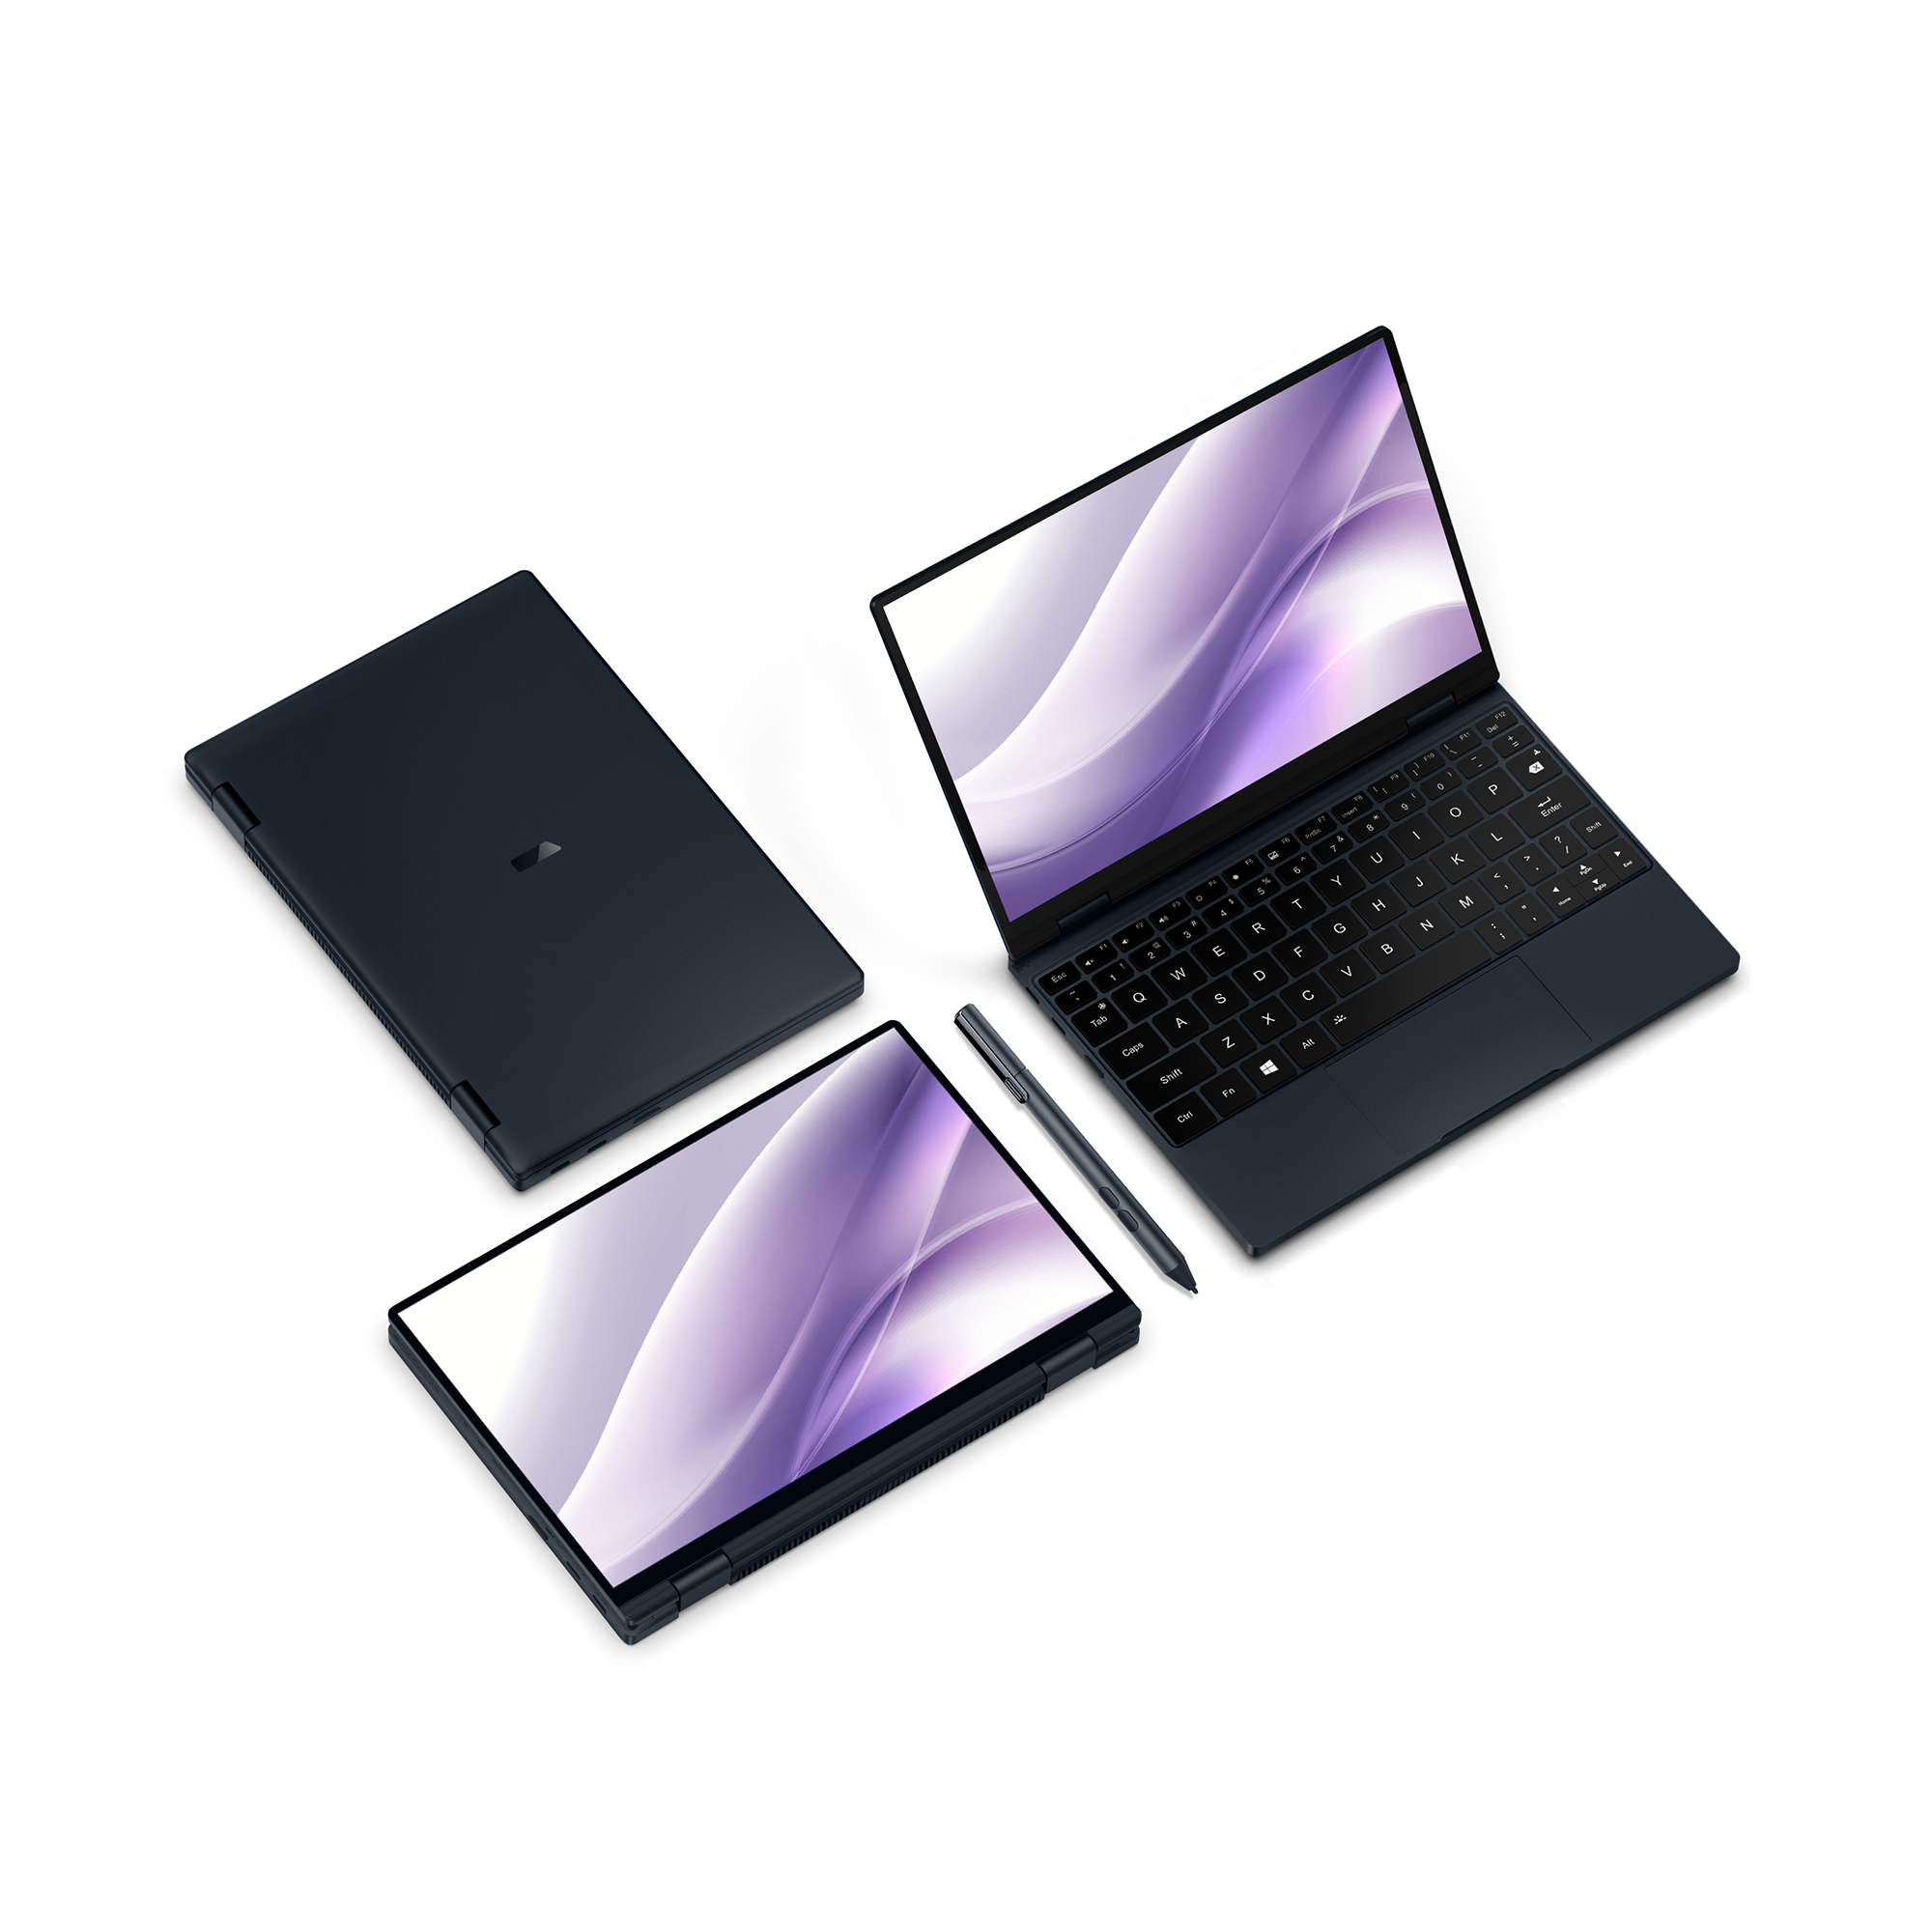 Computer laptop Ultraplate onemix4 onenotebook 10.1 inch small size pocket netbook 11th generation core i5 1130G7 8GB 16GB1tb IPS touch screen wi